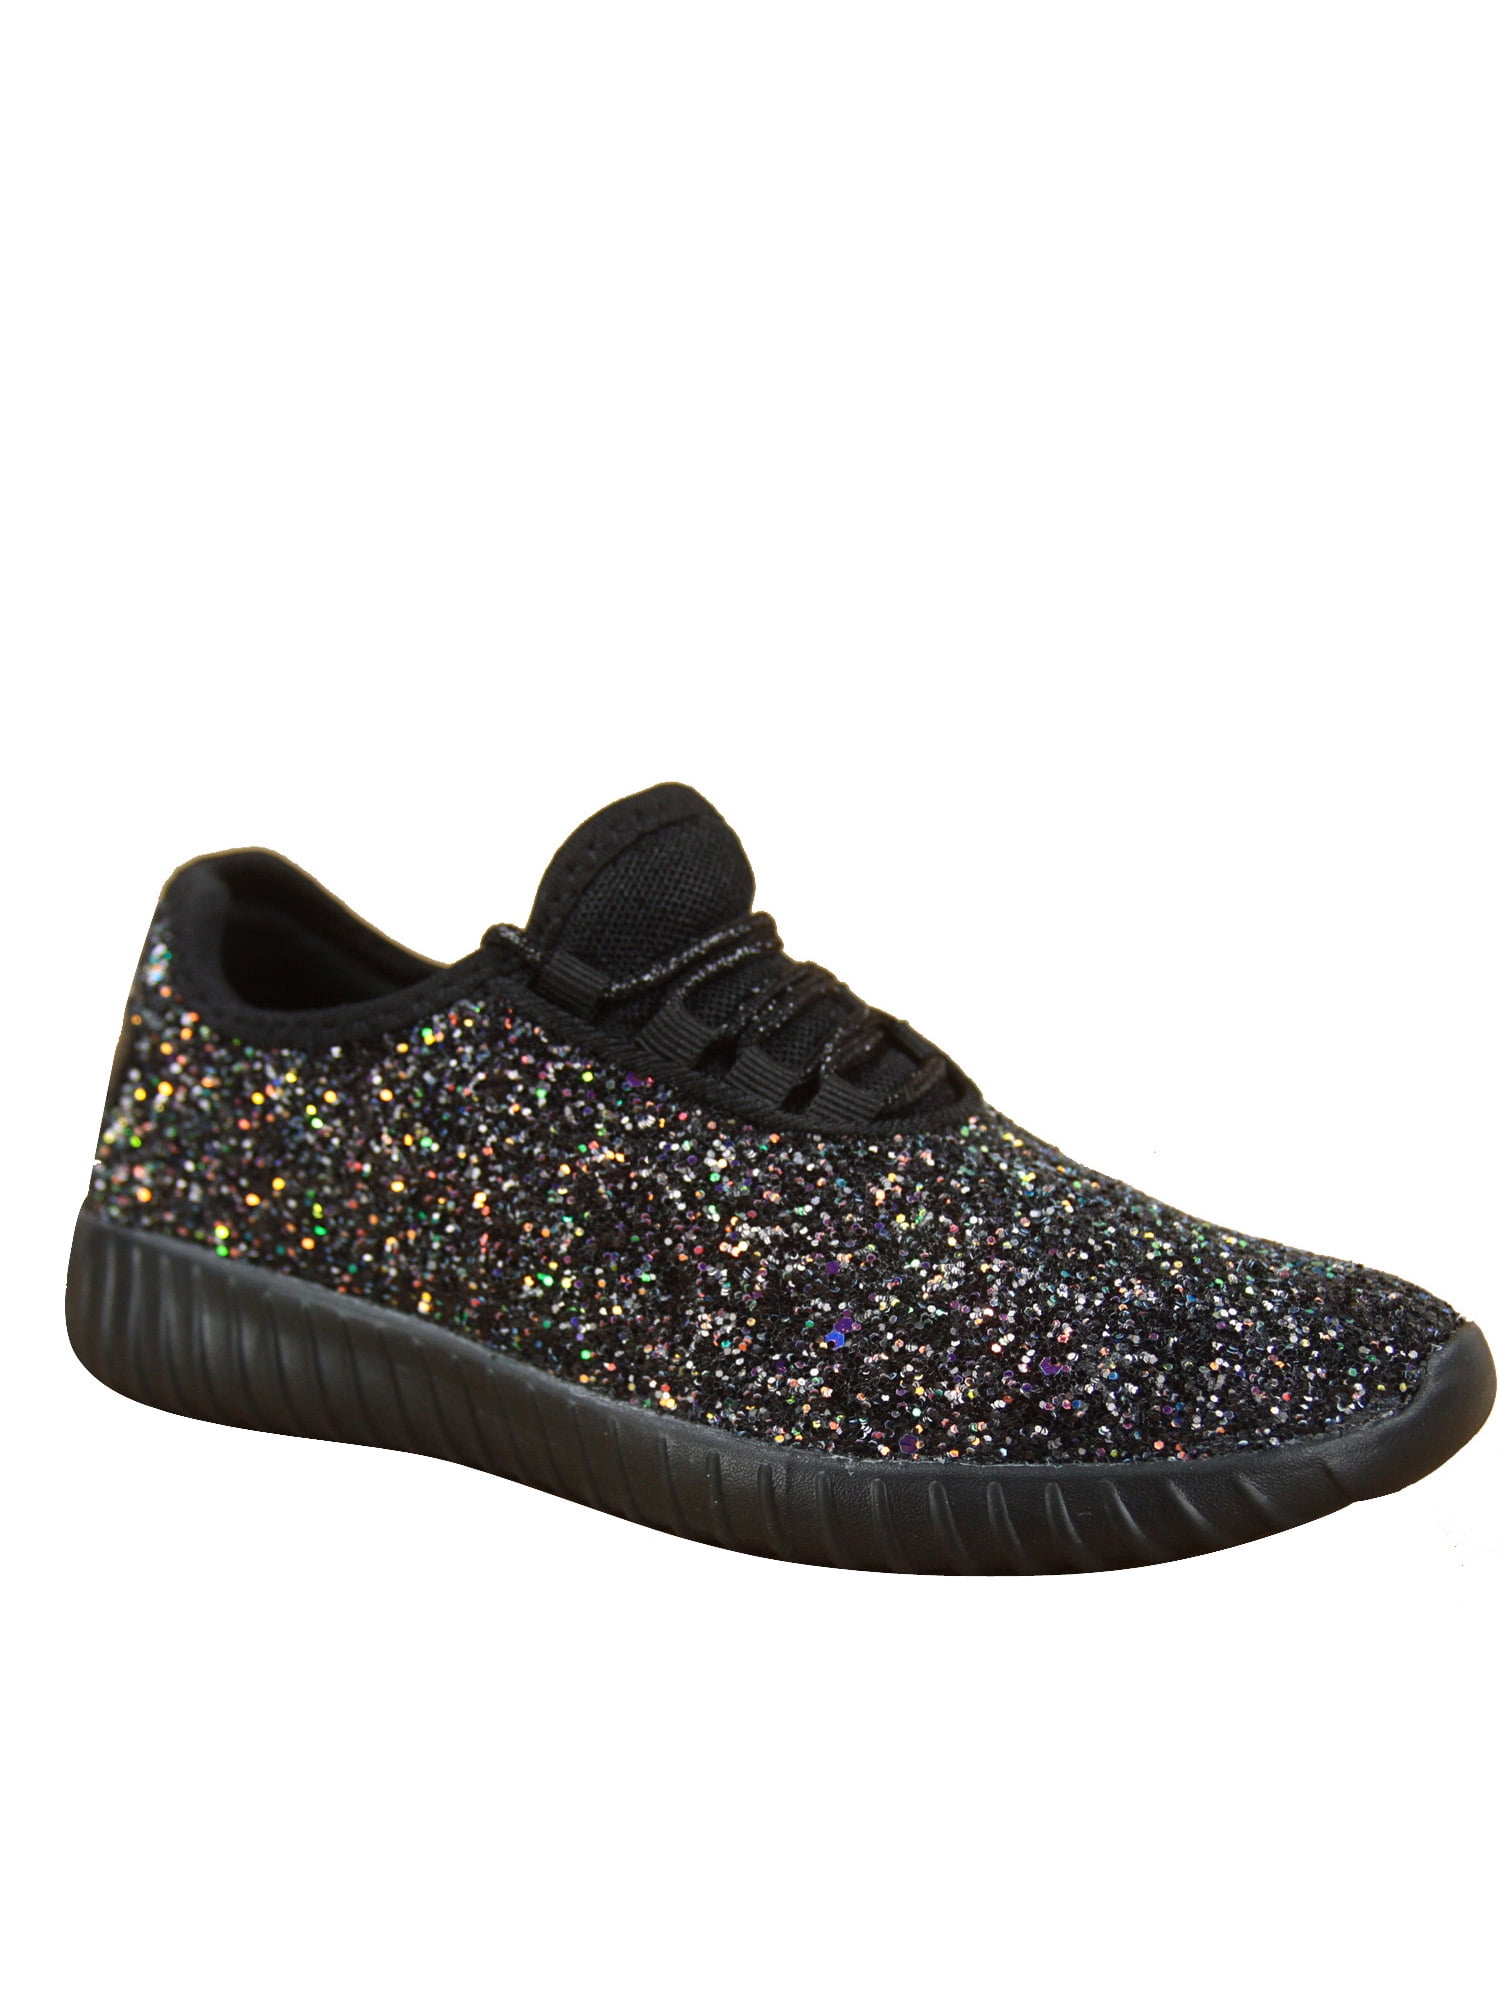 Very G Light Up My World Sparkly Sneakers in Black 6